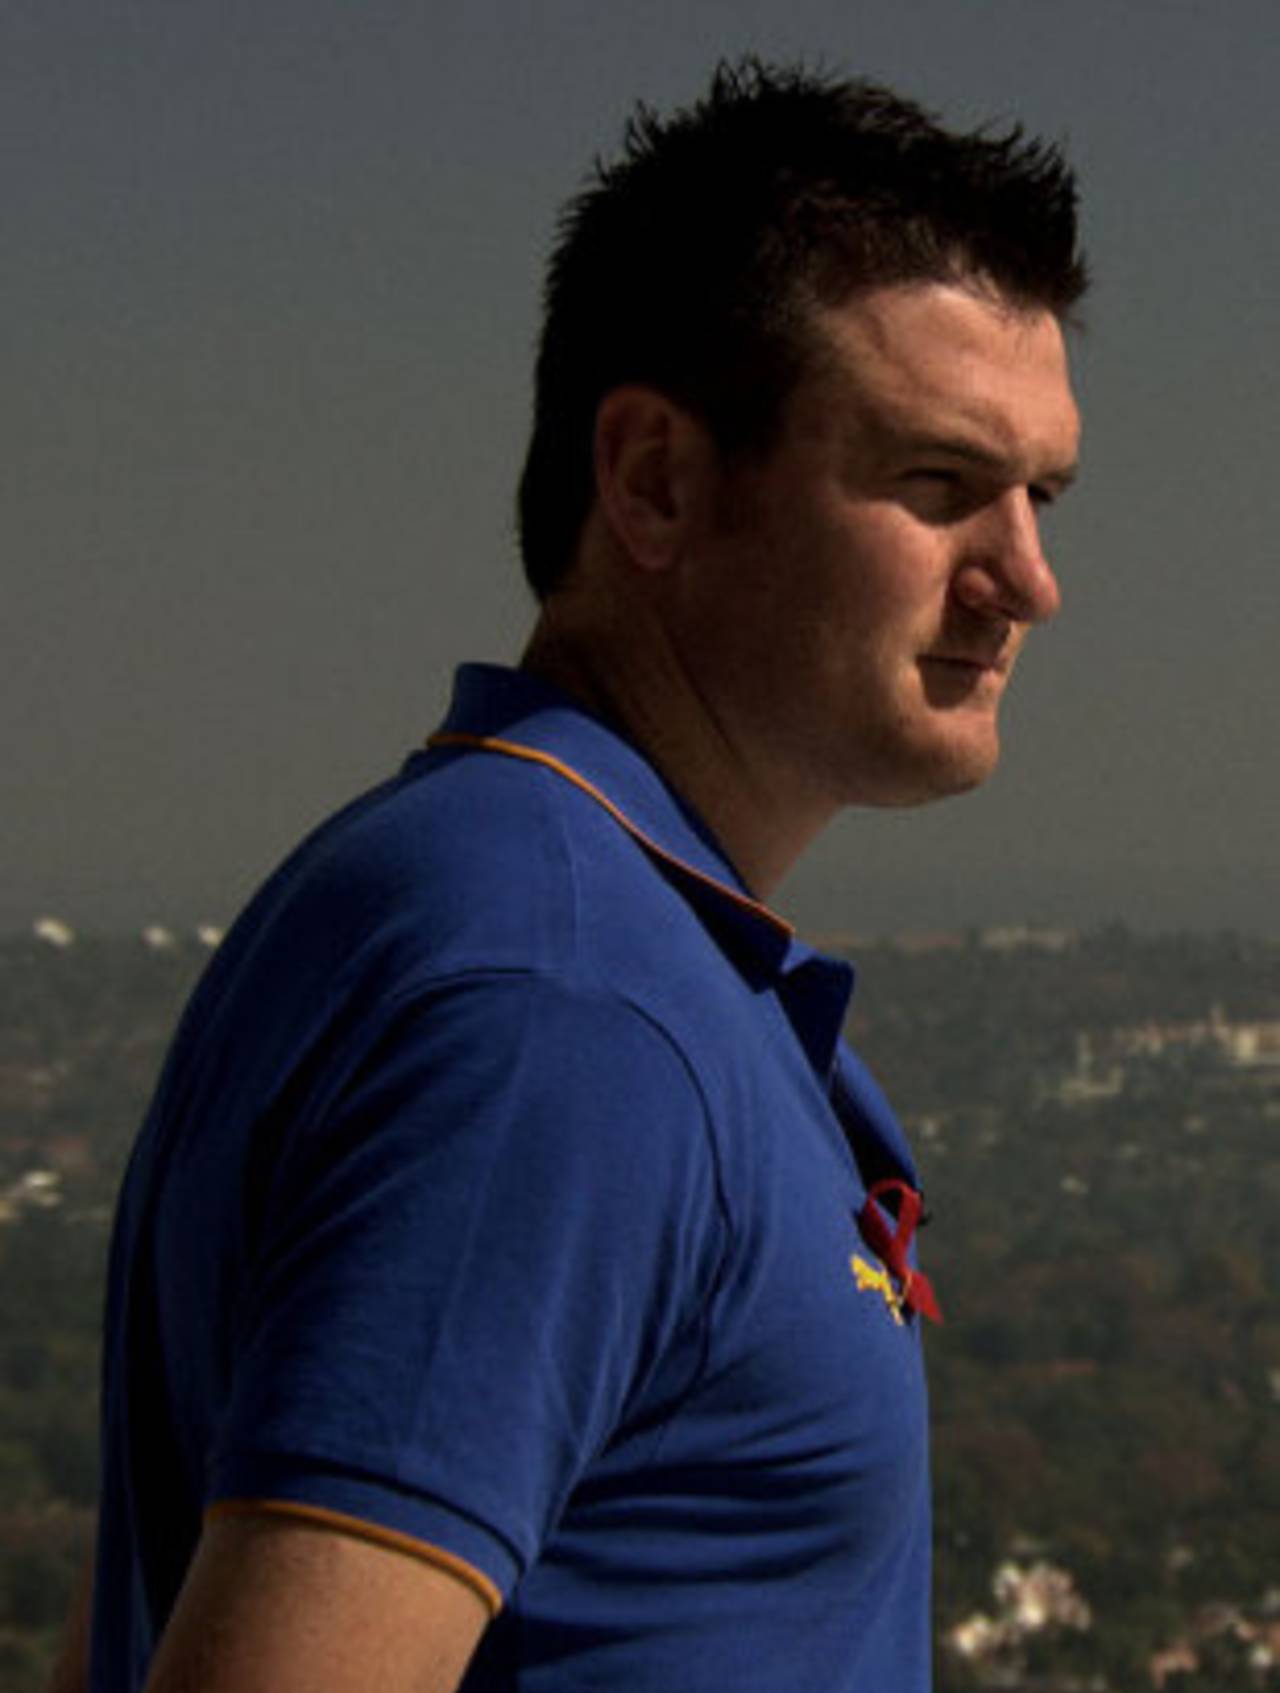 Graeme Smith is a THINK WISE champion, September 2009